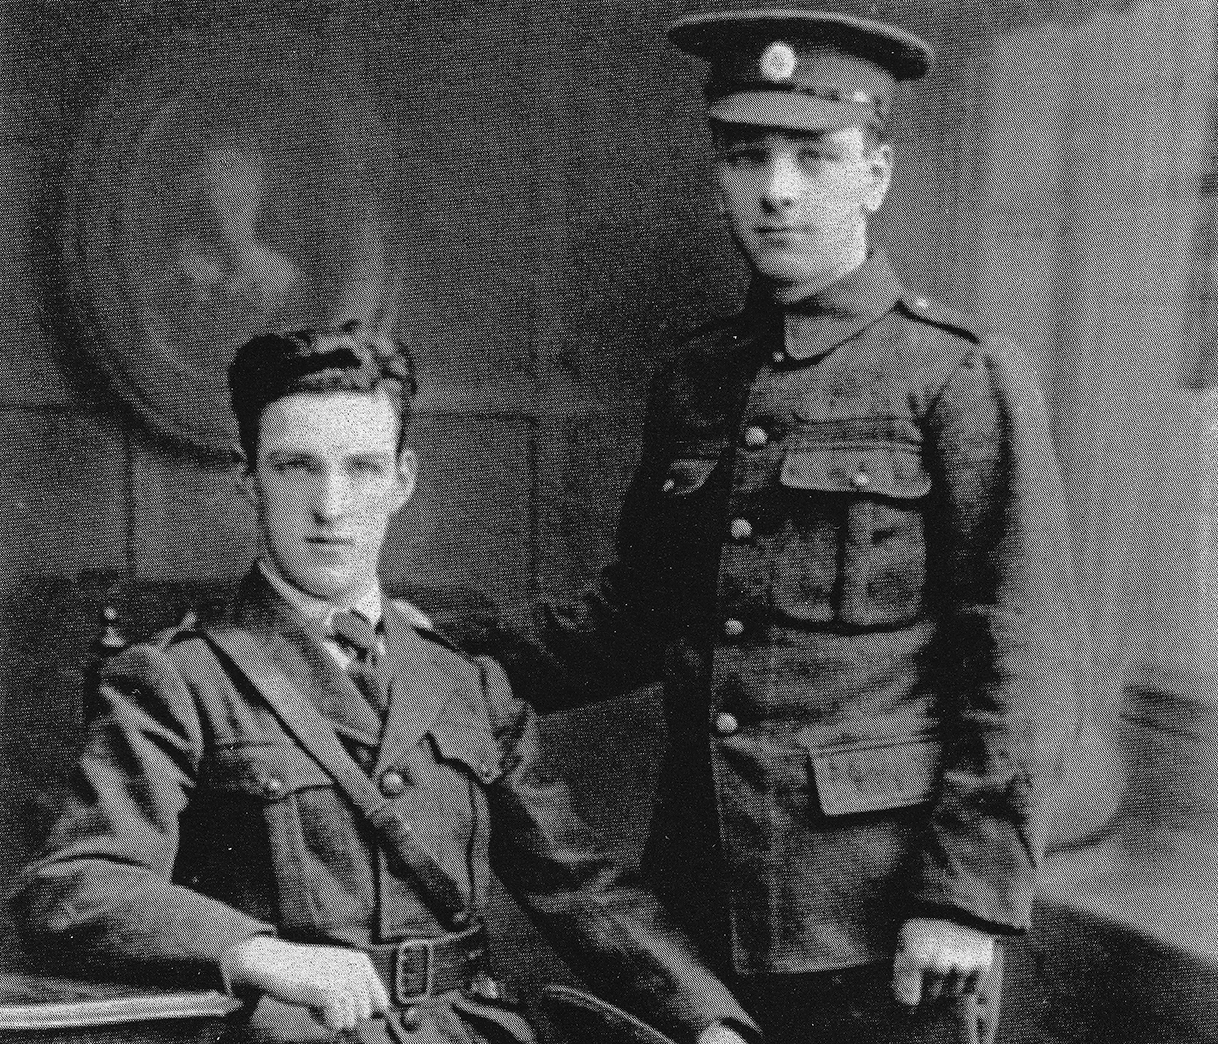 'The O'Connor Brothers'<strong>The story of the Trans-Atlantic Courier and an Irish Volunteer</strong><a href= /1916-easter-rising/tommy-and-johnny>CLICK HERE TO READ MORE</a>